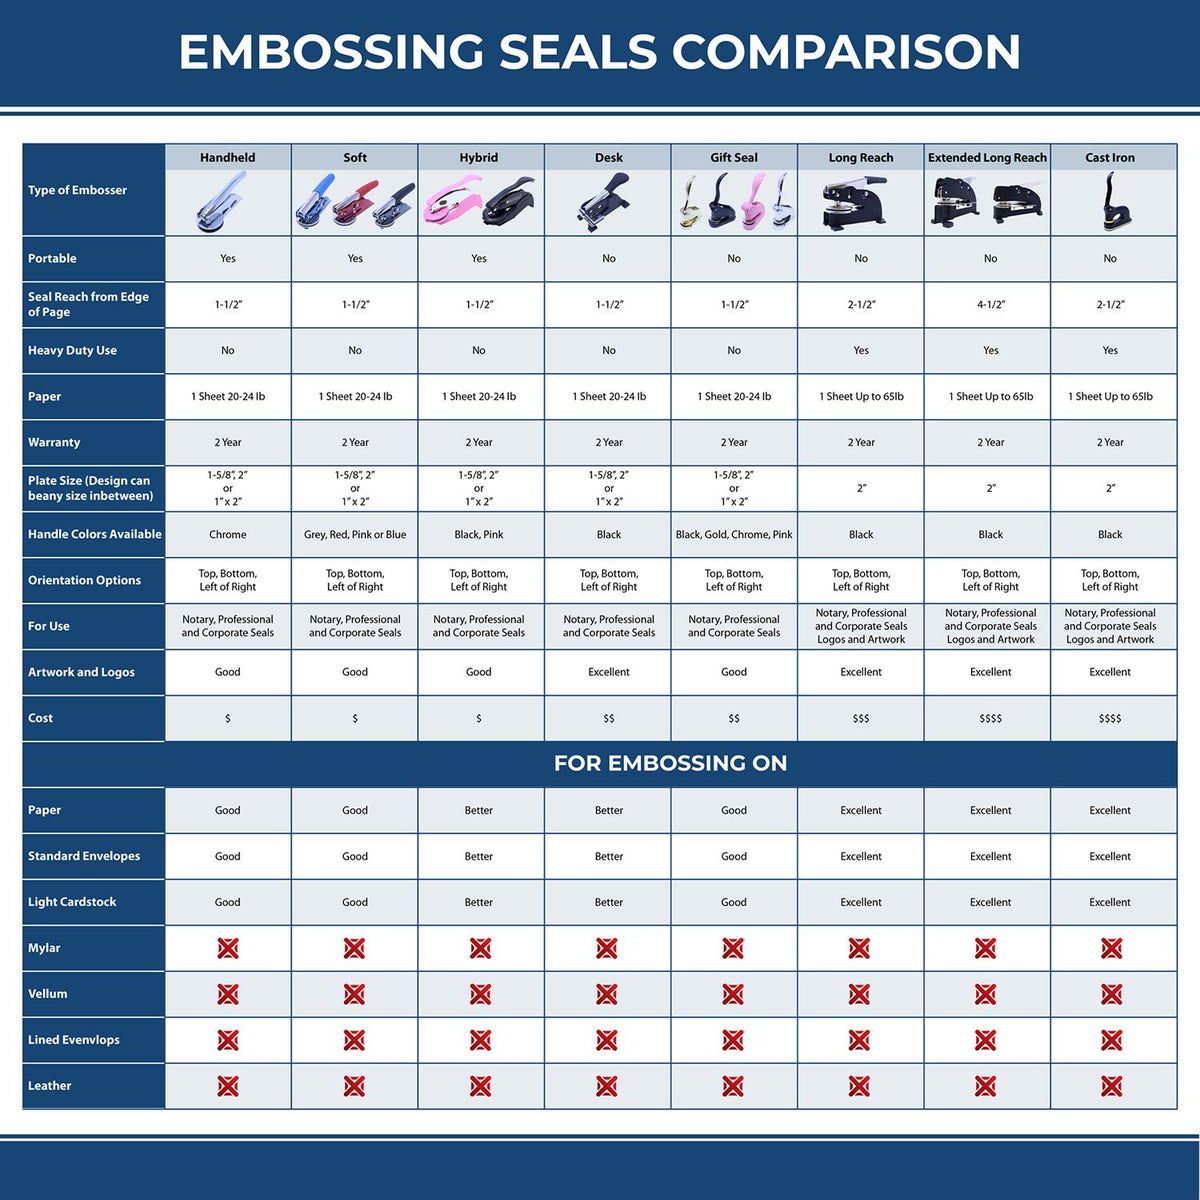 A comparison chart for the different types of mount models available for the State of Kentucky Long Reach Architectural Embossing Seal.